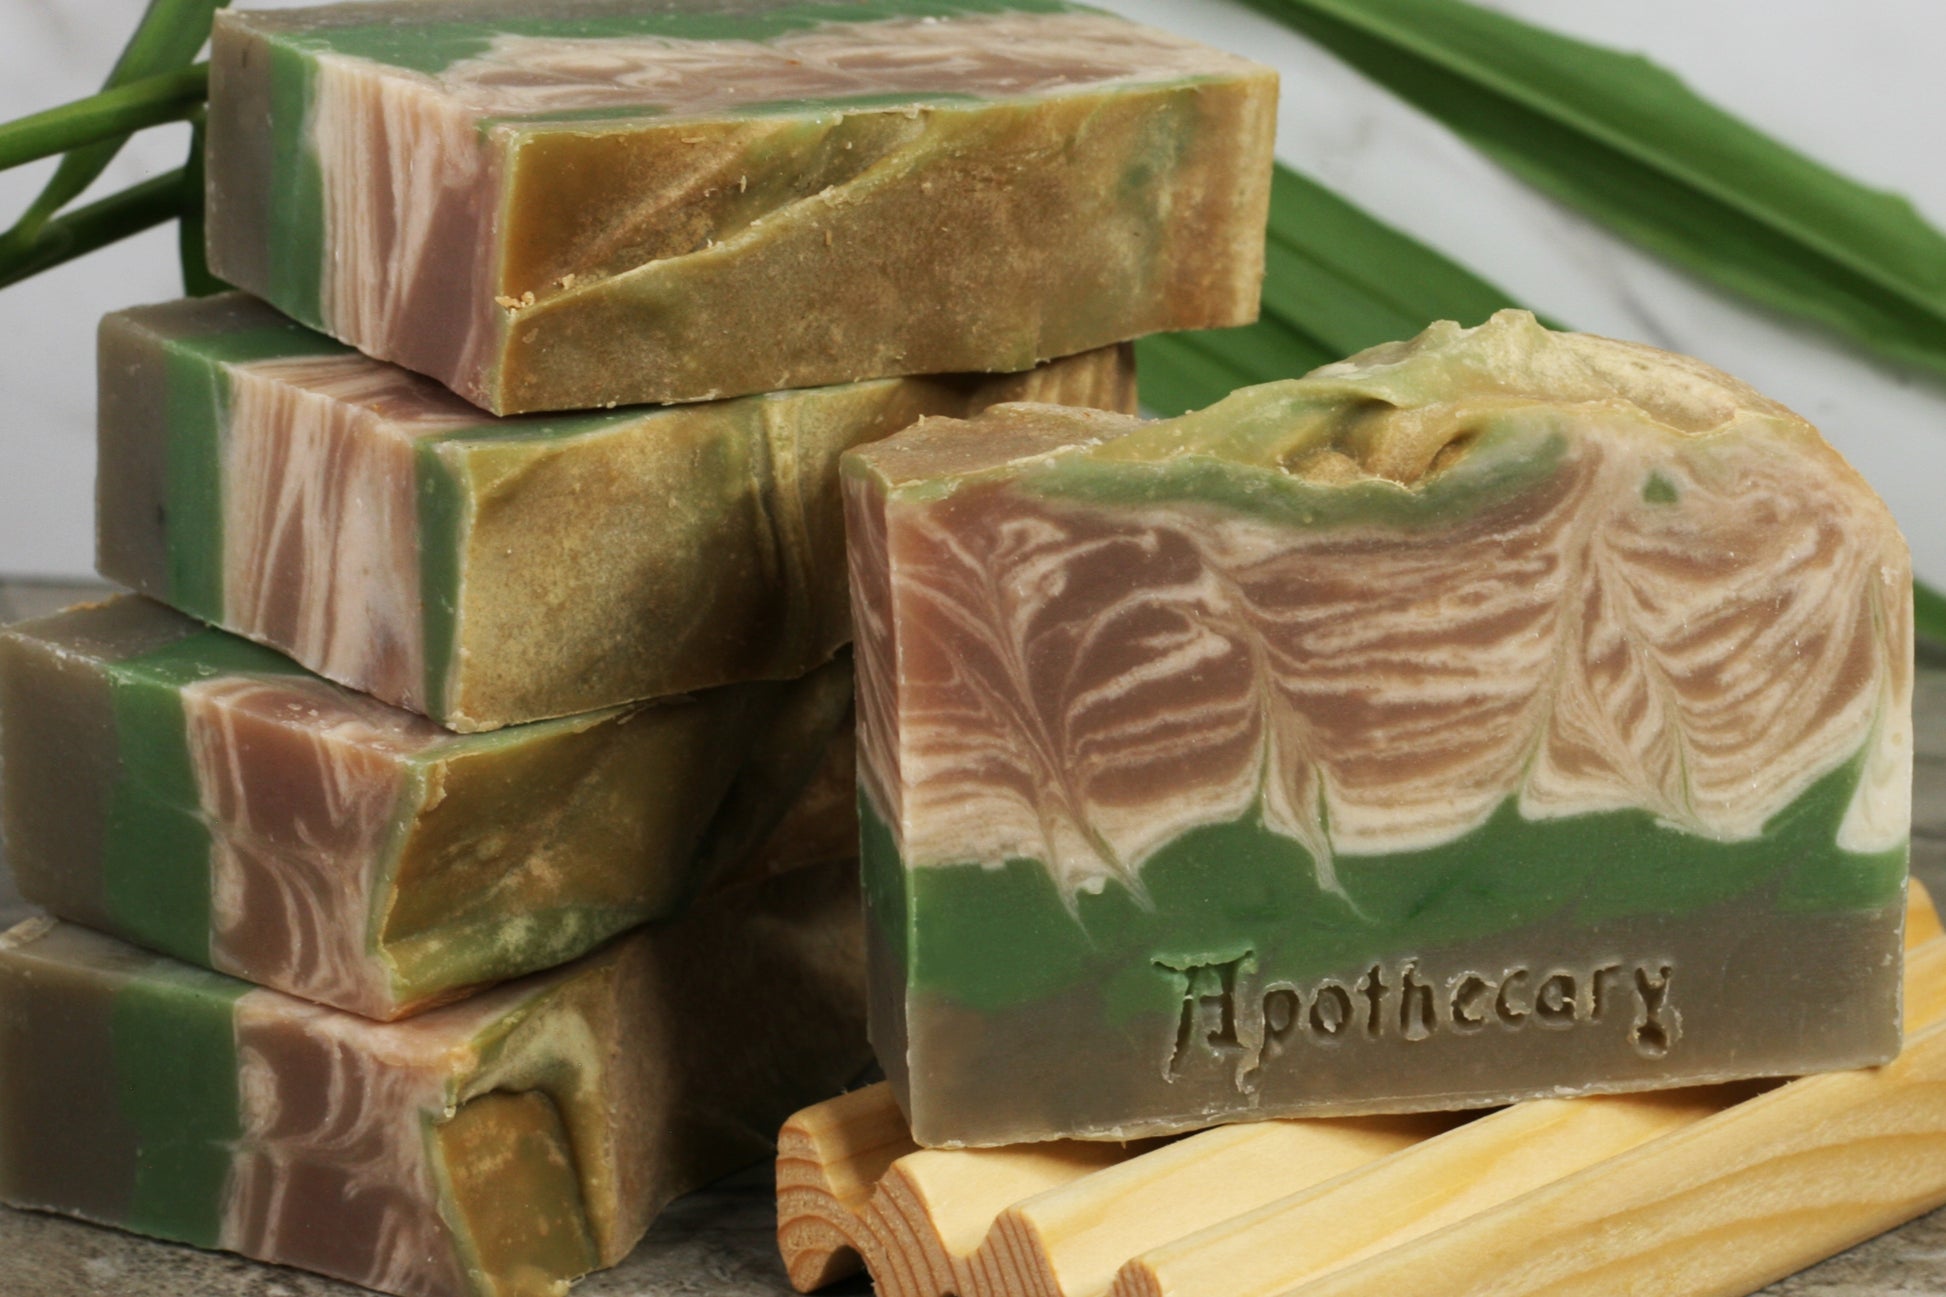 Coconut and bamboo handmade artisan soap with white, beige, and green swirls.